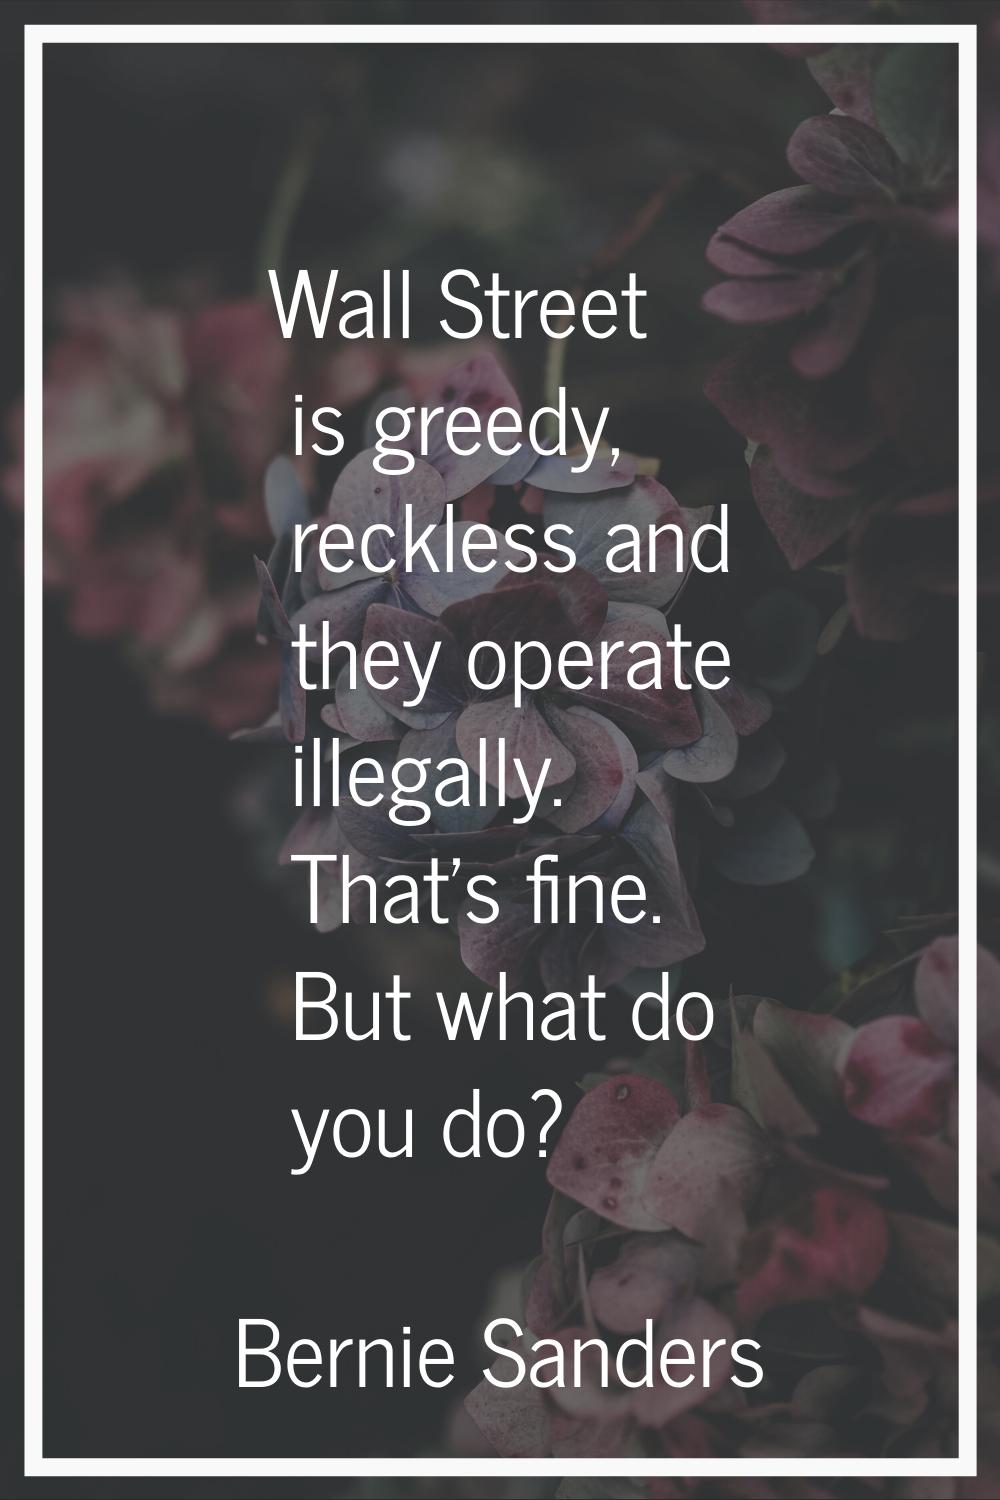 Wall Street is greedy, reckless and they operate illegally. That's fine. But what do you do?